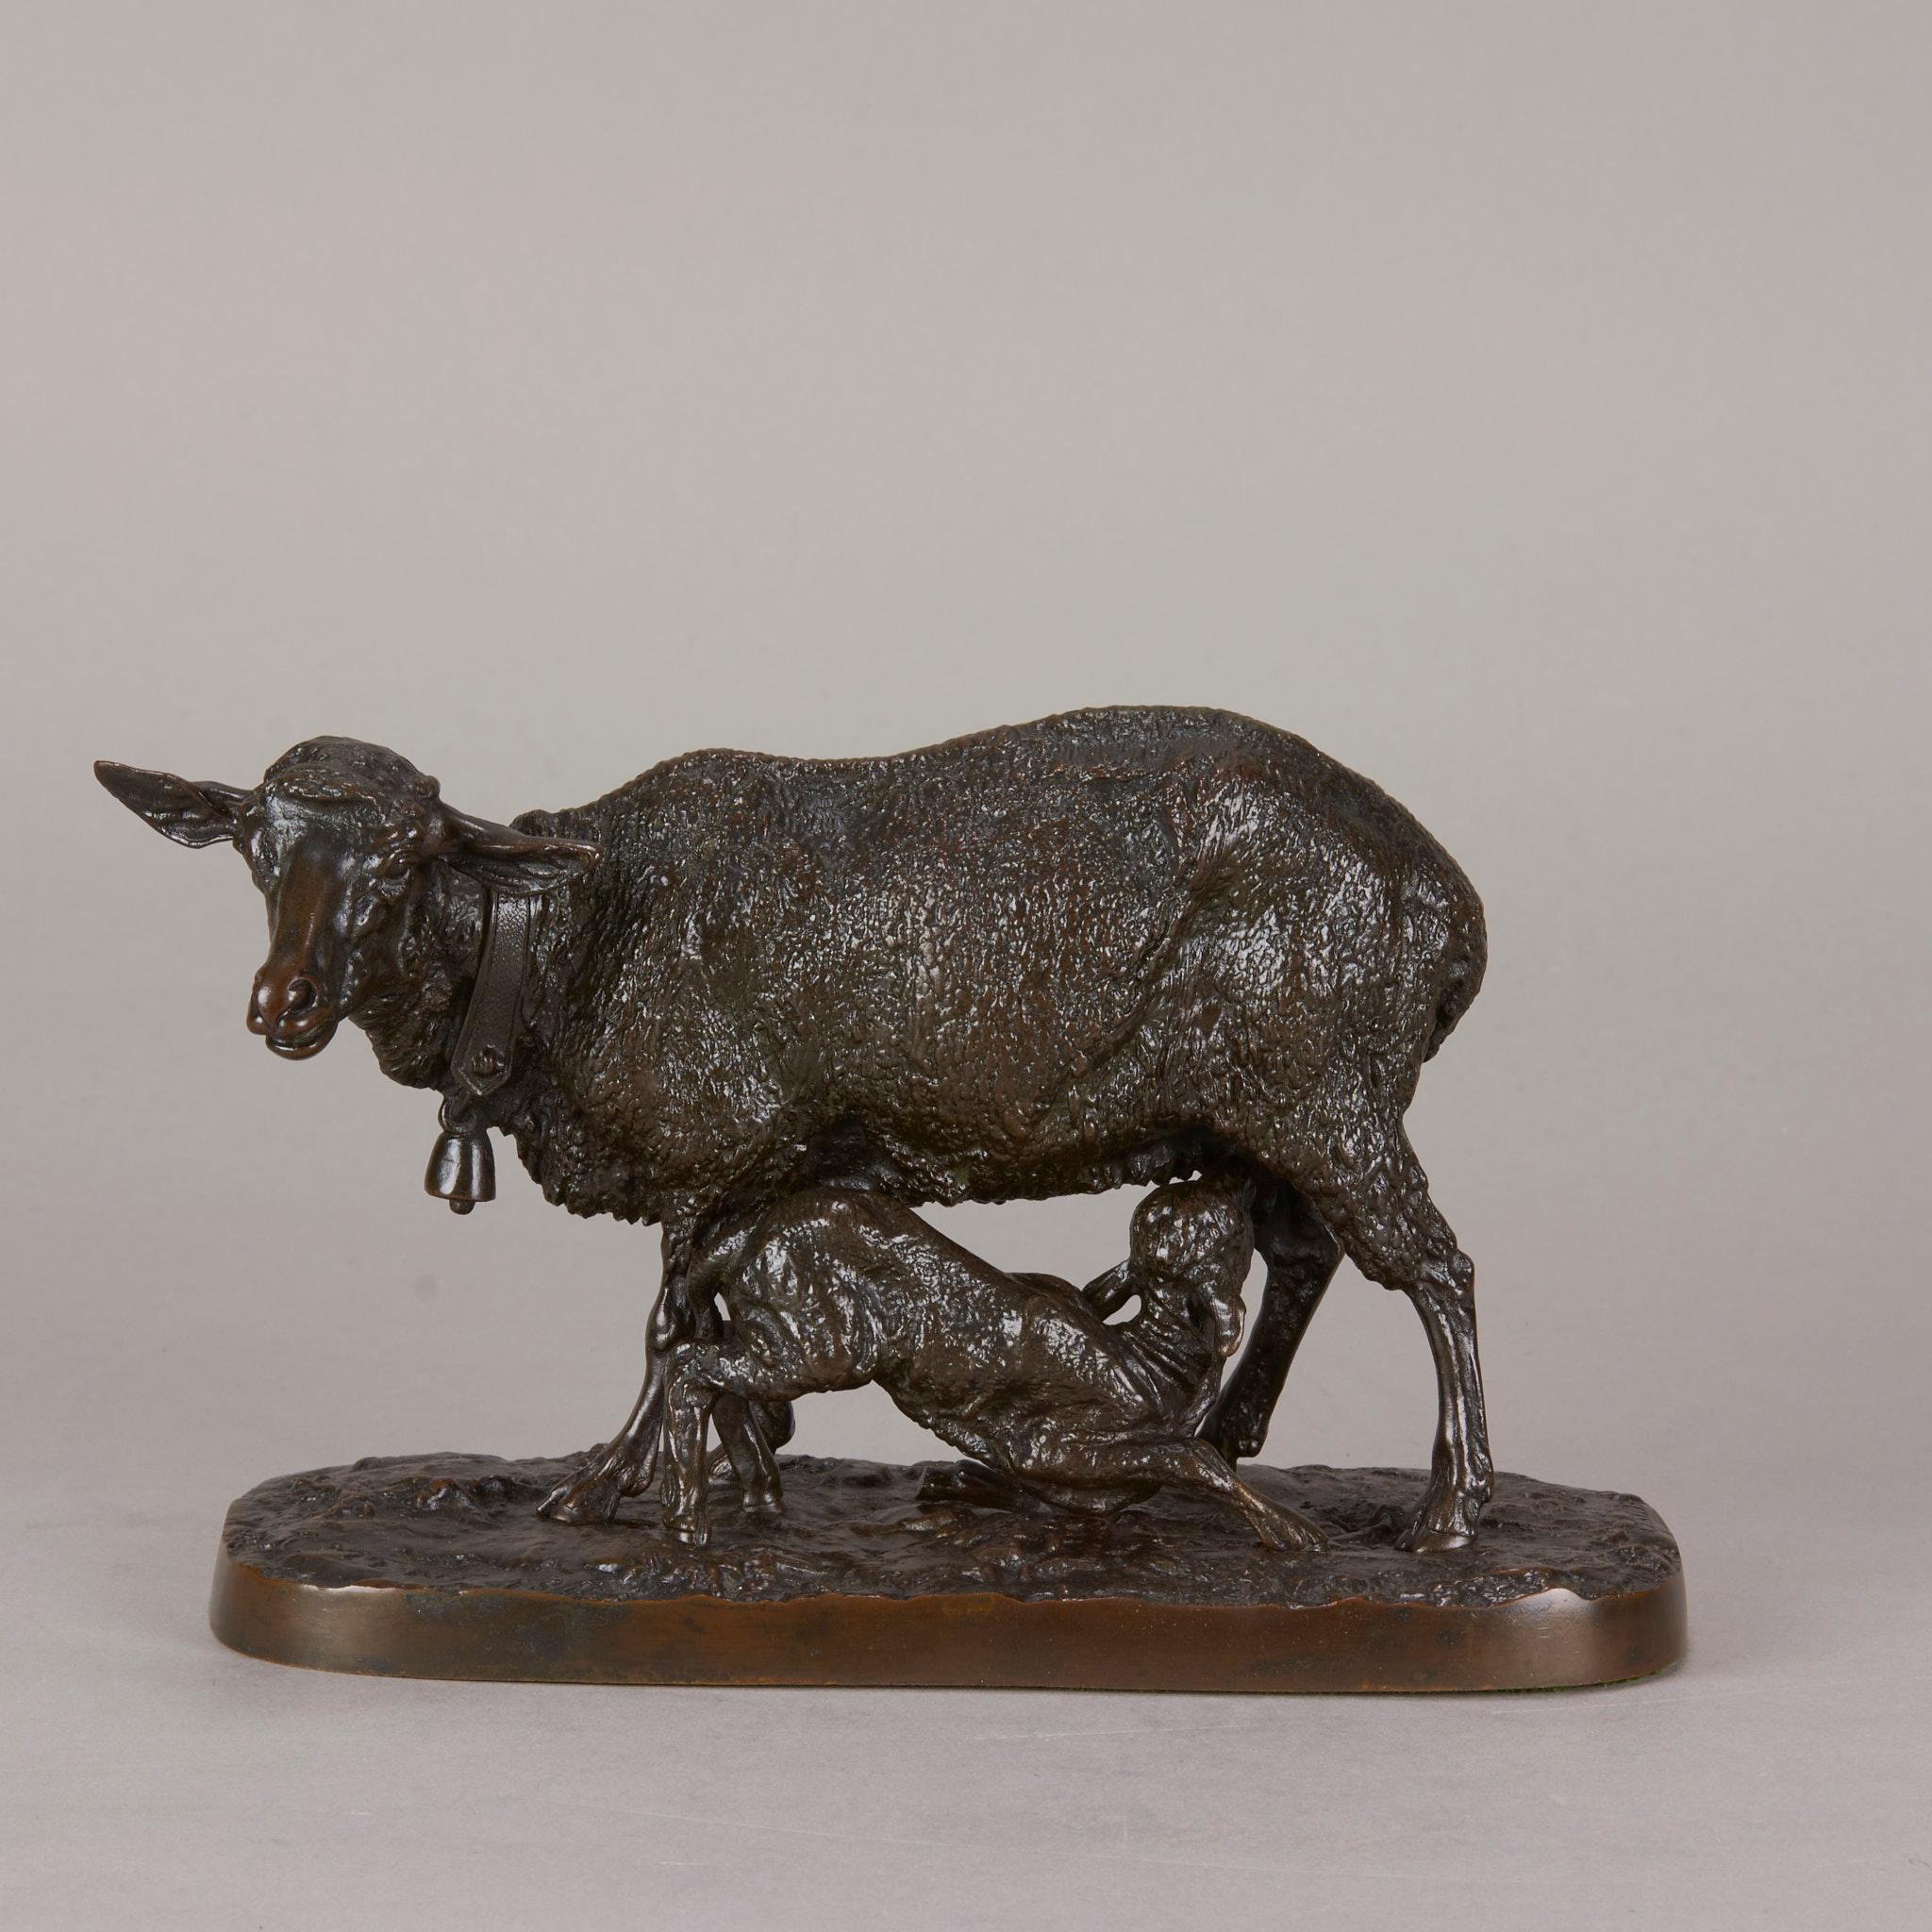 Wonderful 19th Century animalier bronze group of a standing ewe with her feeding lamb beneath her, the bronze with excellent rich brown patina and very fine hand chased surface detail, raised on a naturalistic base, signed P J Mêne and inscribed